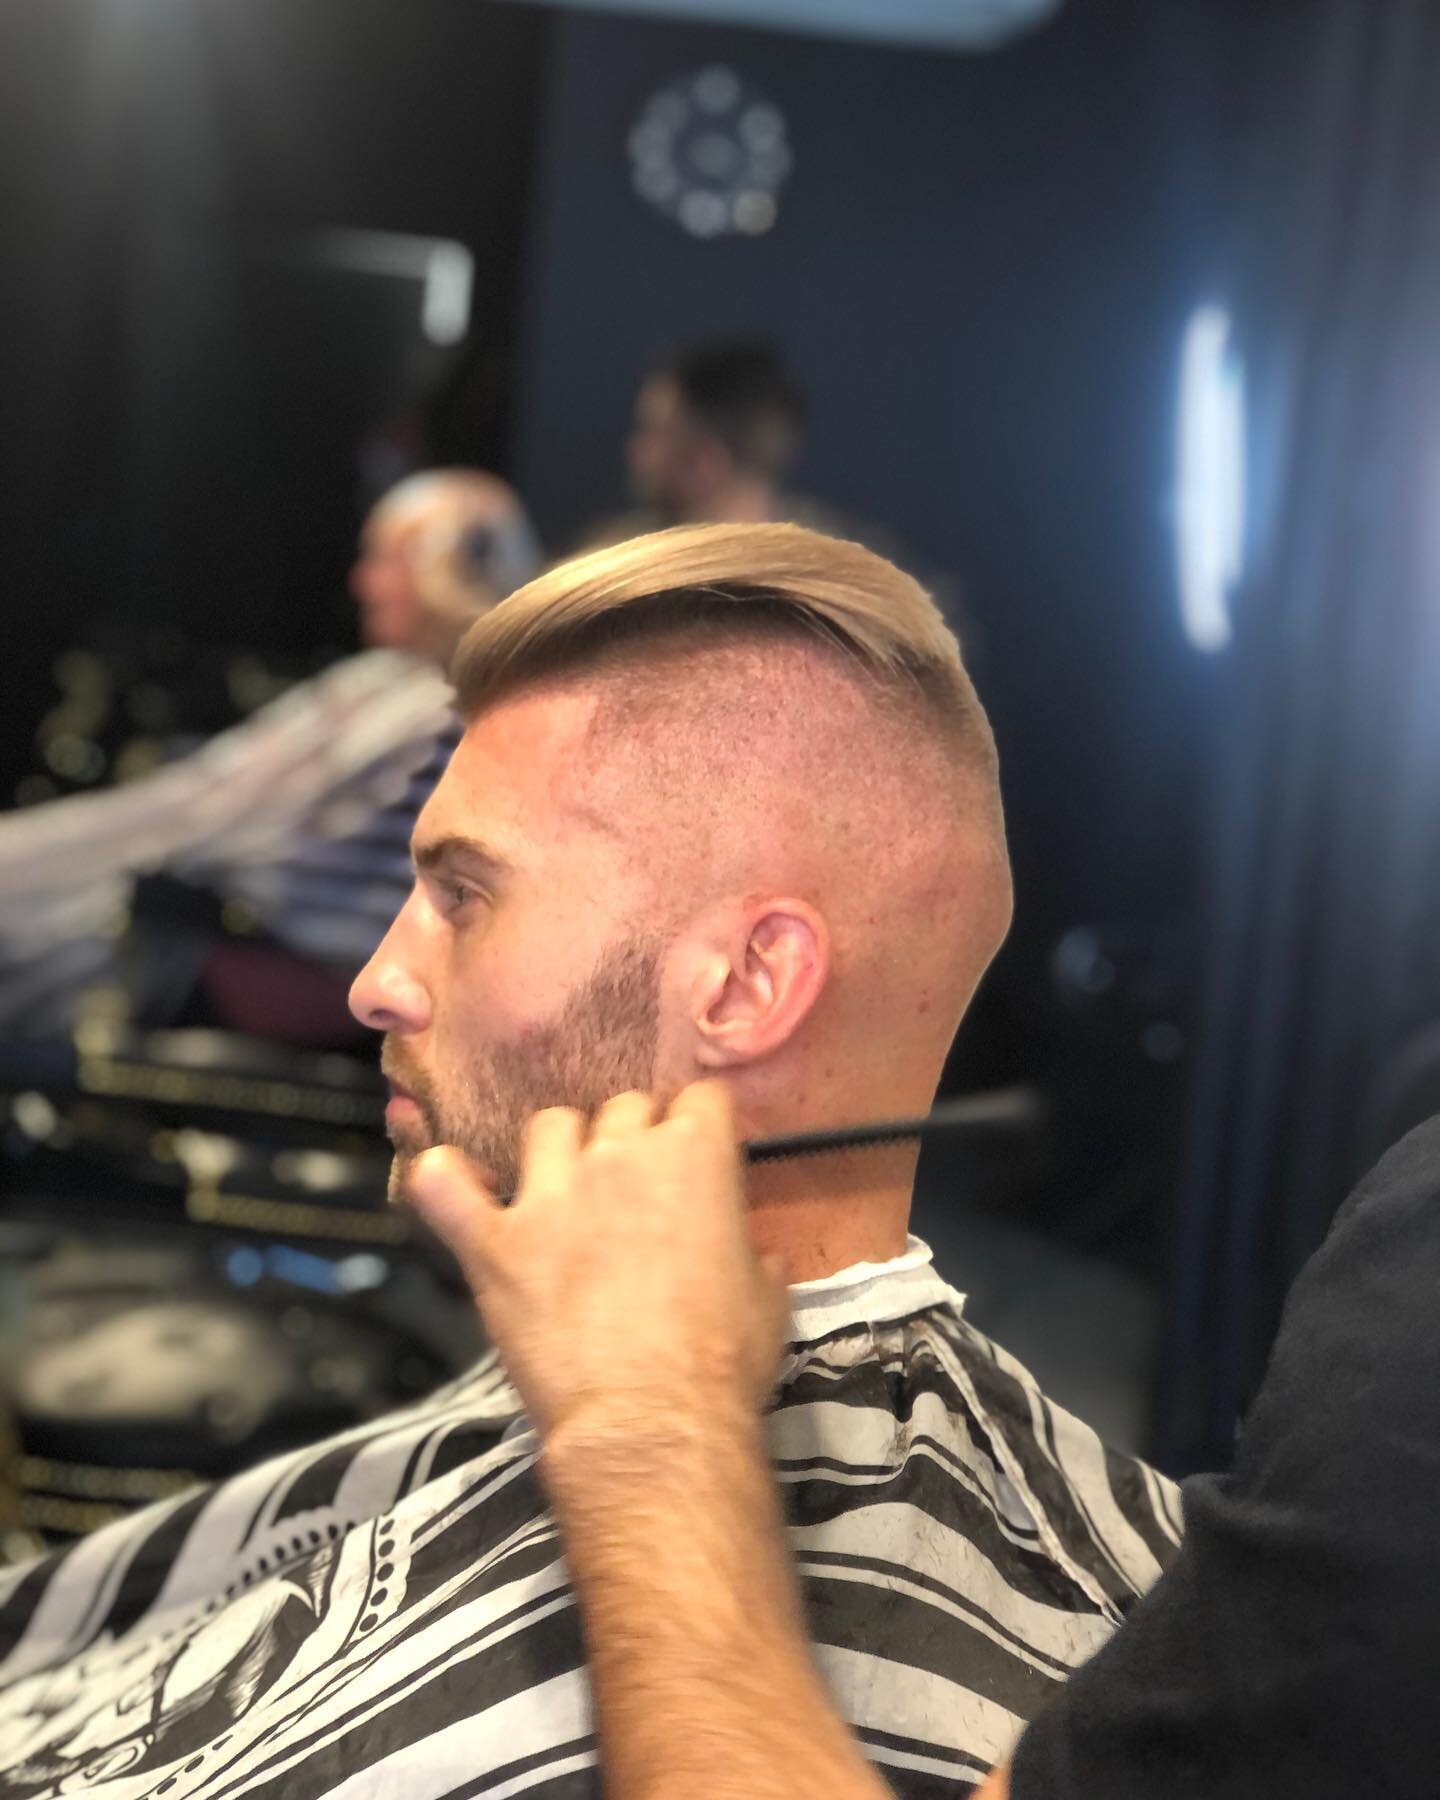 Getting ready for the weekend 😎

#barber 
#barberlife 
#mensstyle 
#menscut